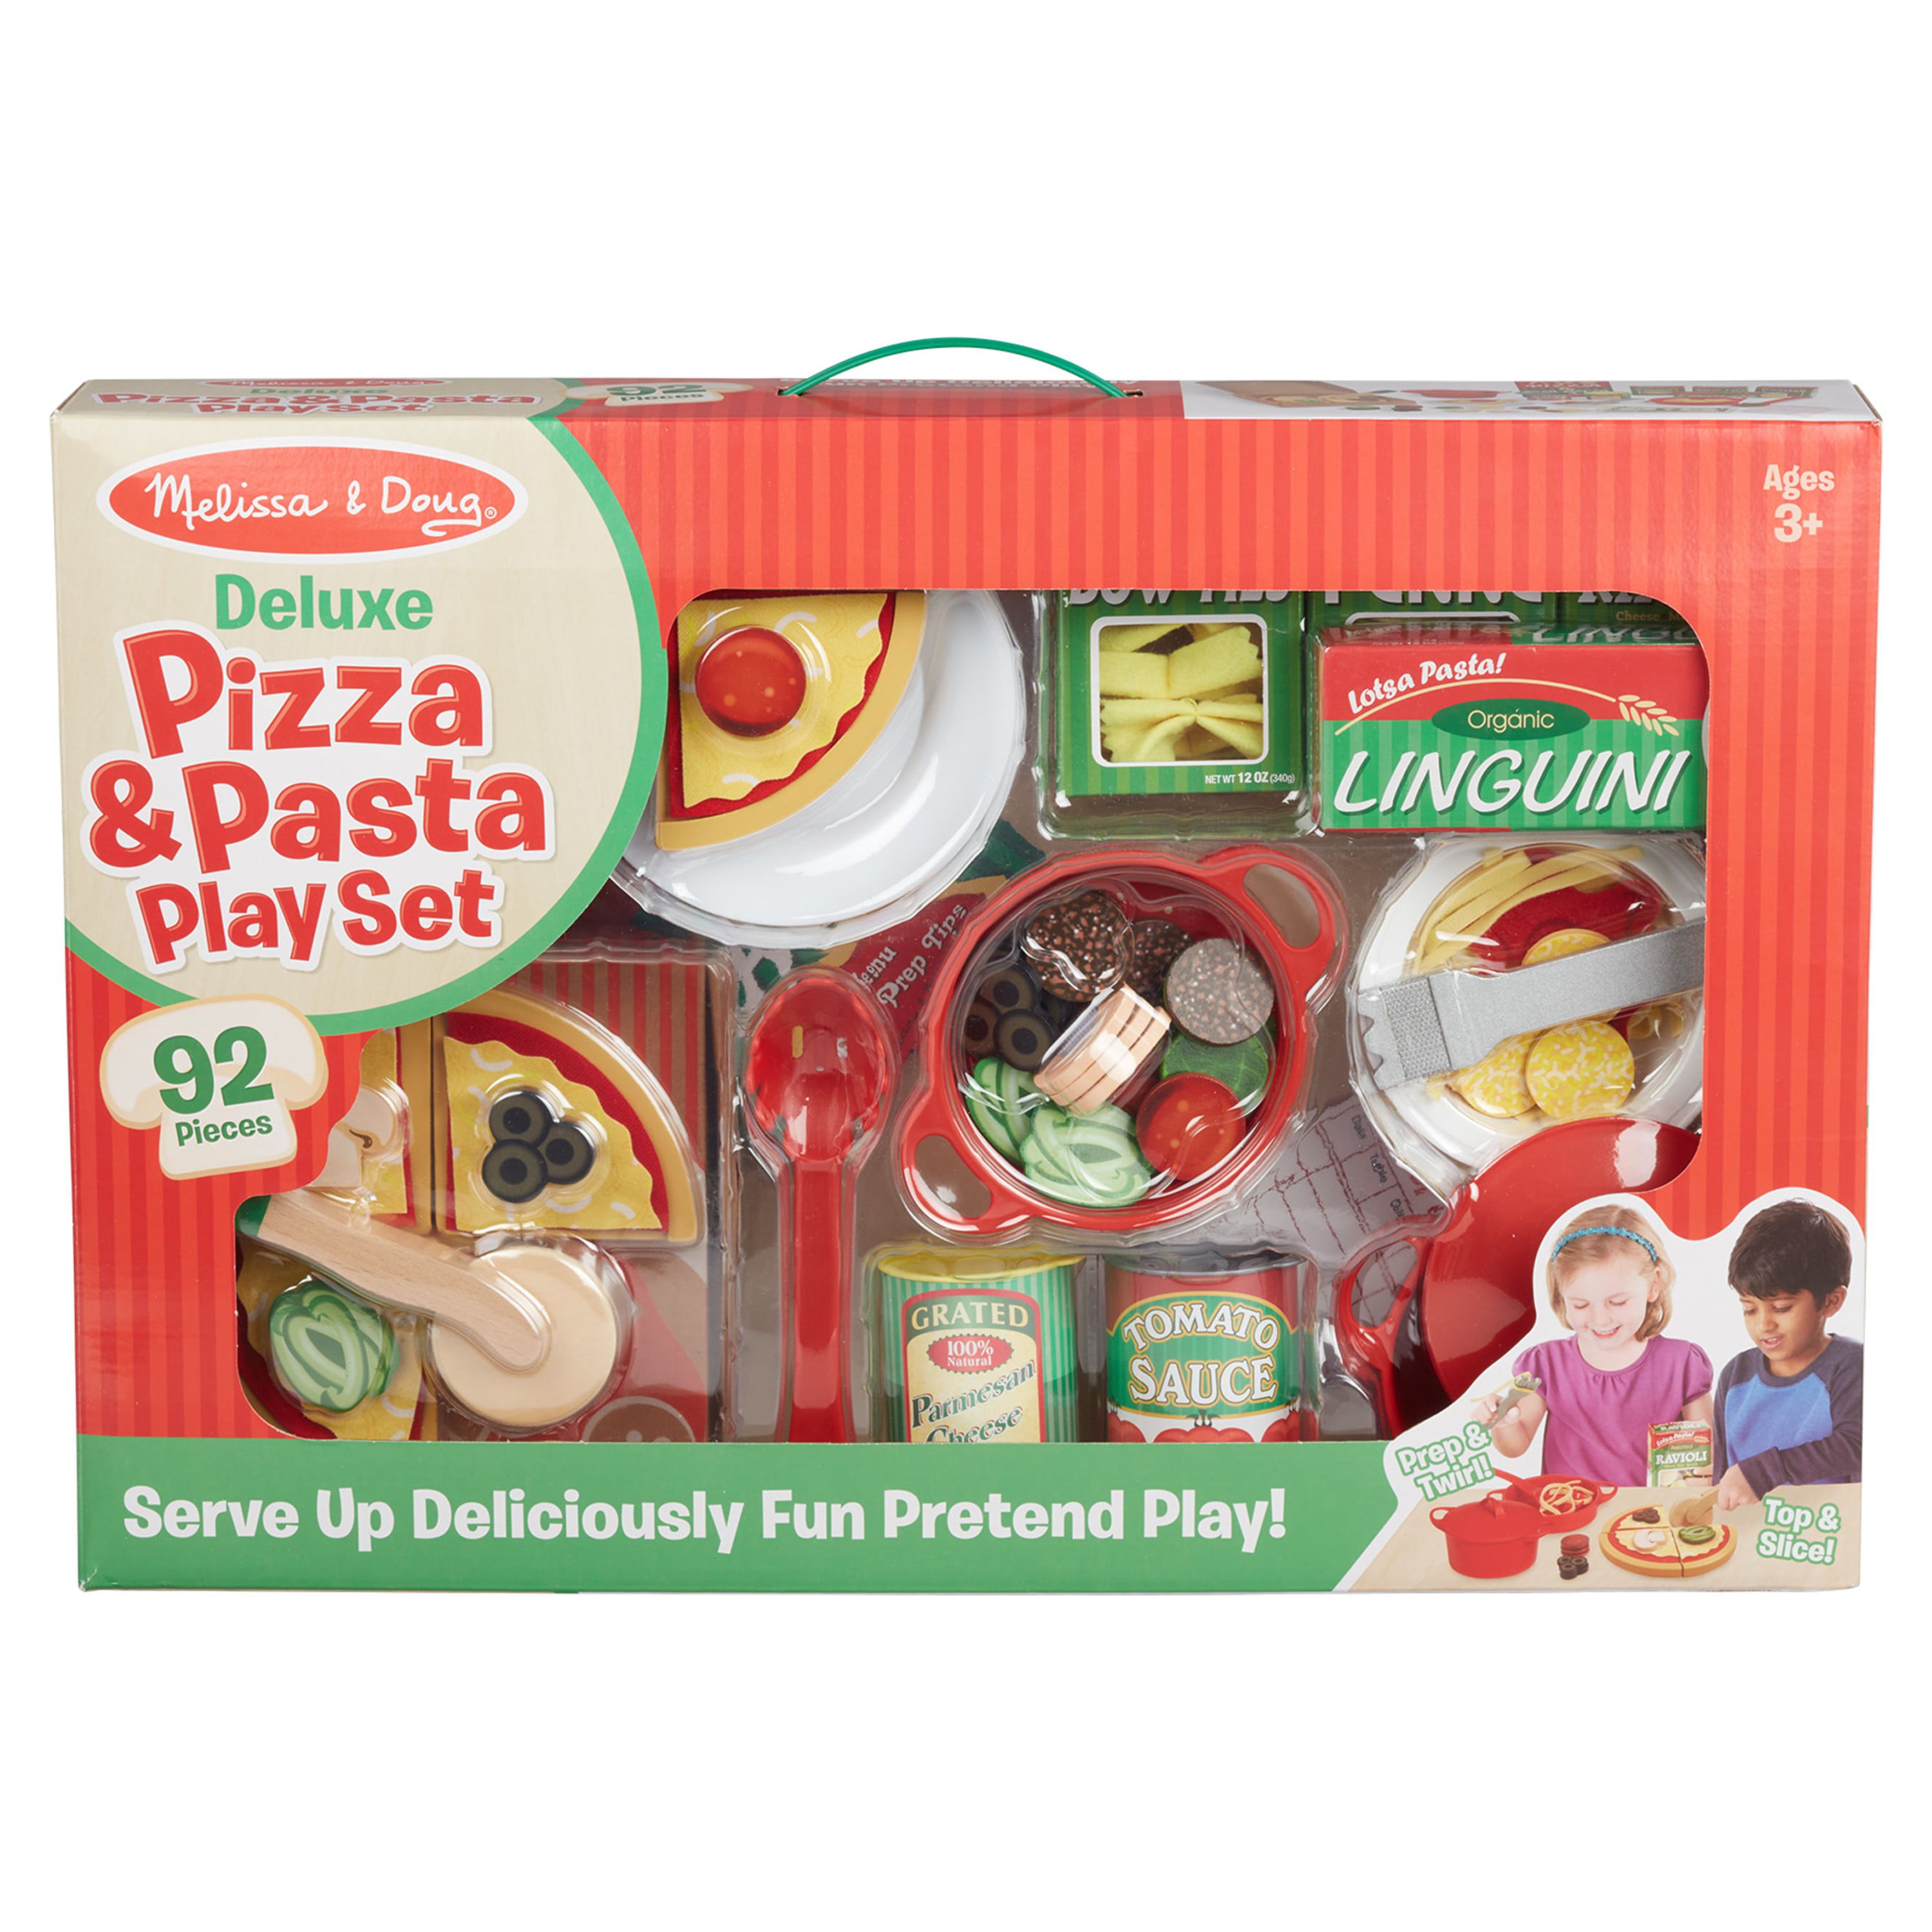 Melissa & Doug Deluxe Pizza & Pasta Play Set Pretend Play Food - 92 Pieces - image 3 of 9